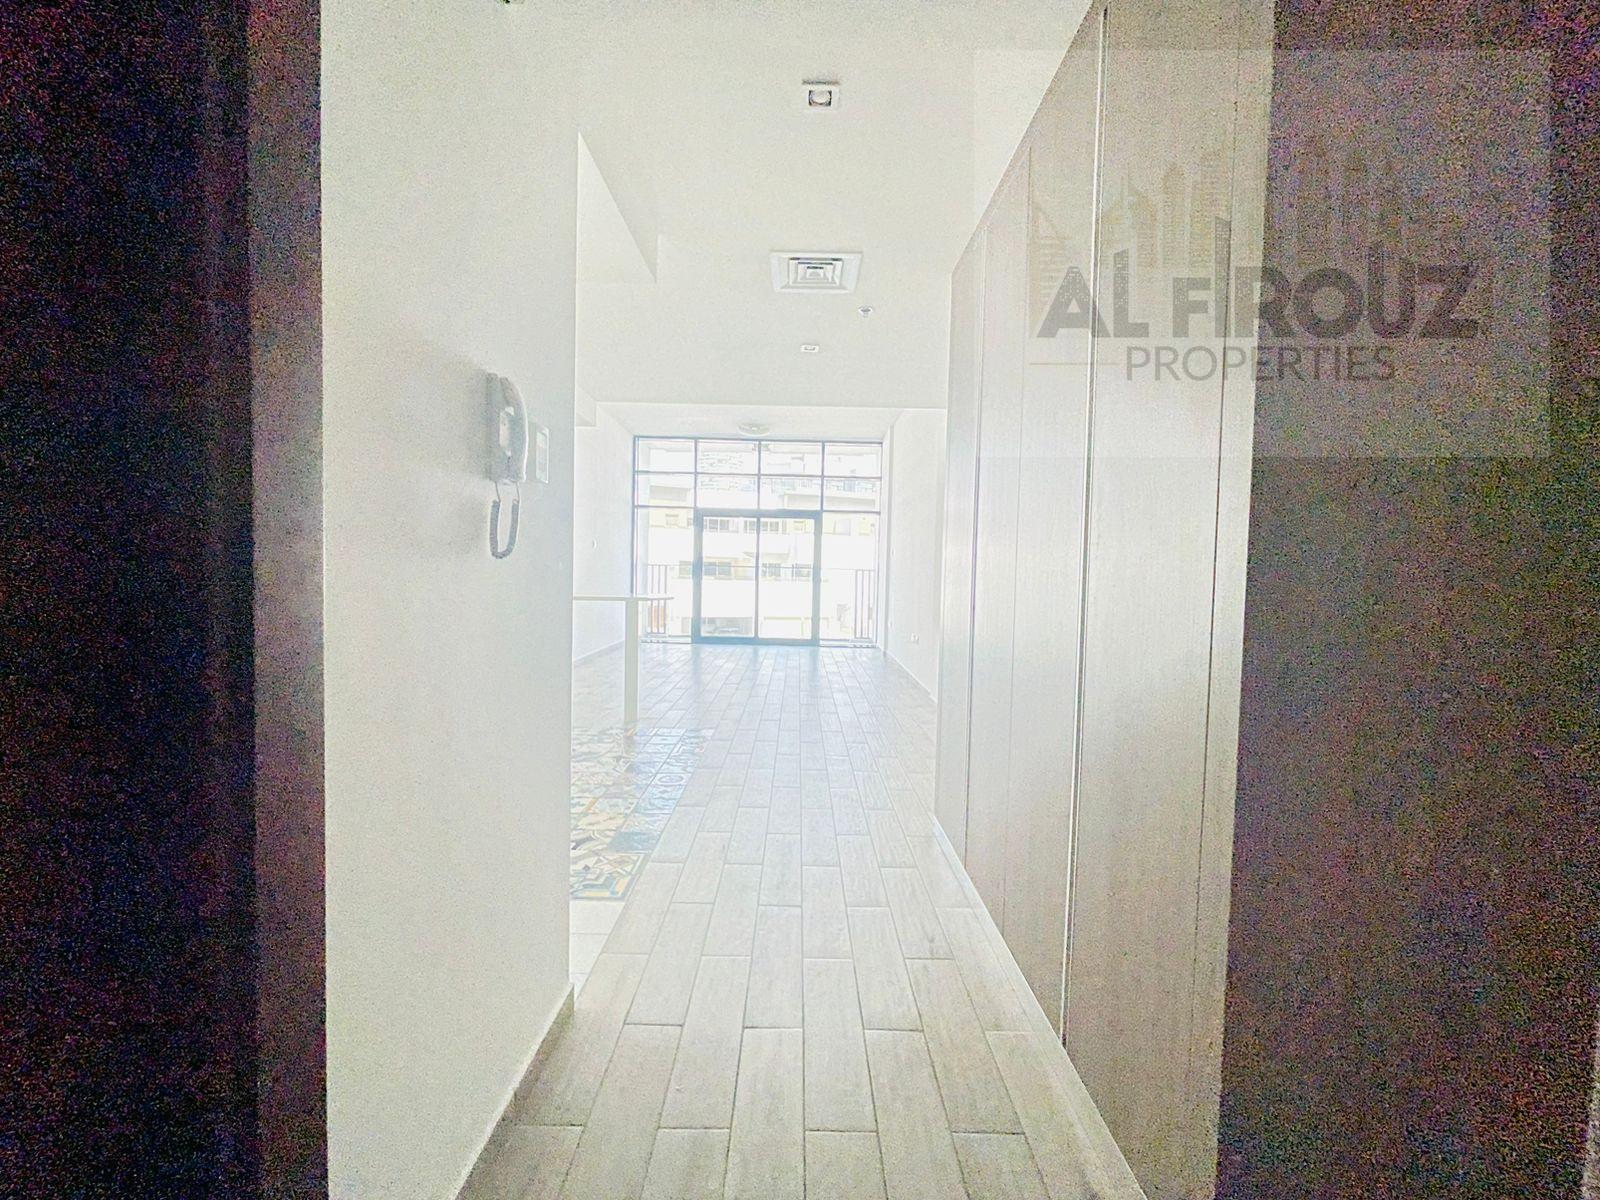 1 bath Apartment for rent in Shamal Residences, Jumeirah Village Circle, Dubai for price AED 45000 yearly 